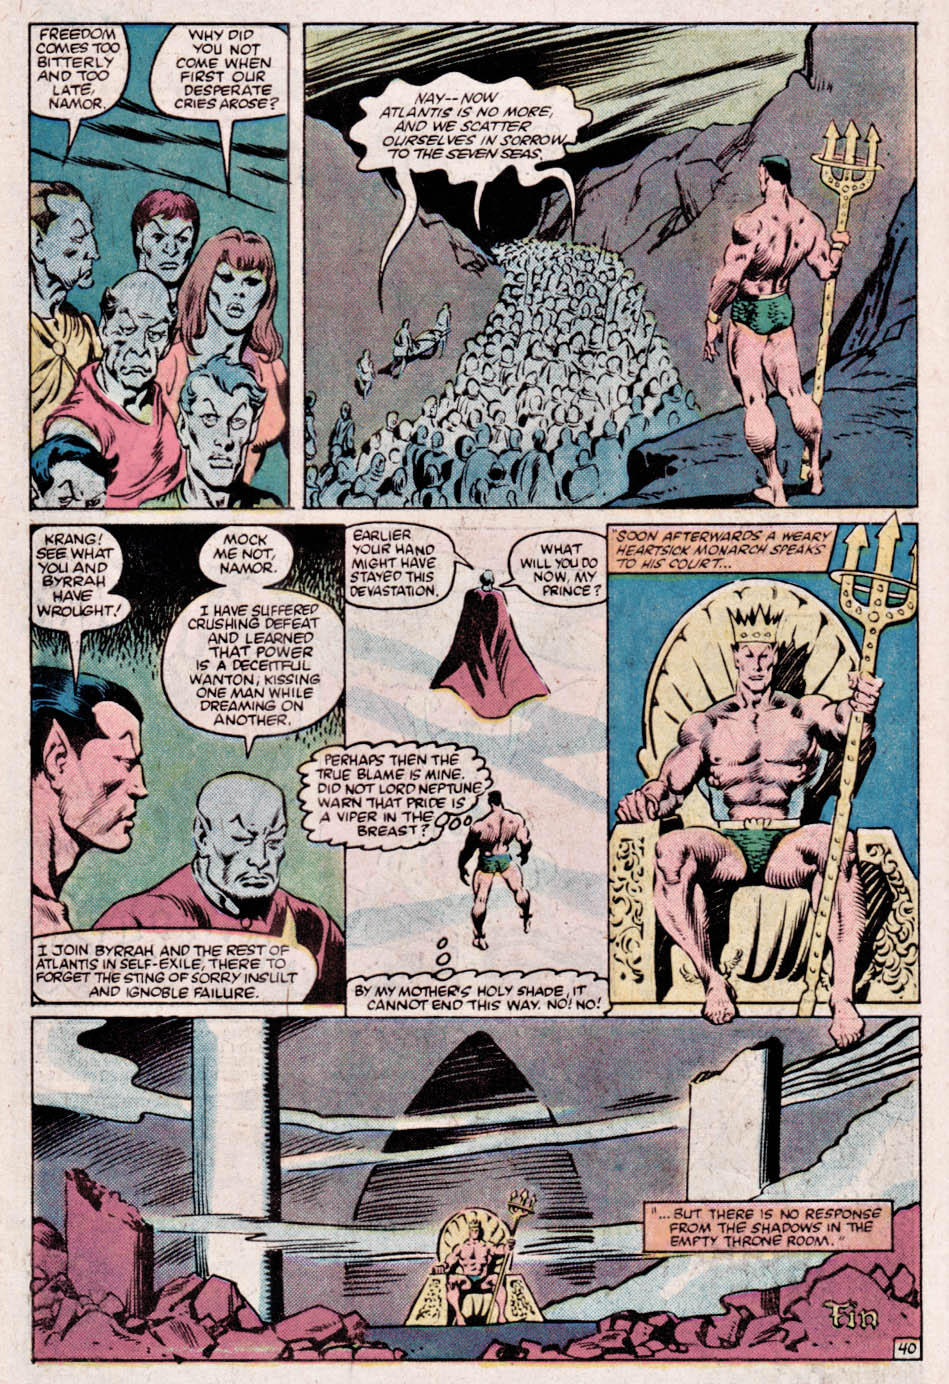 What If? (1977) issue 41 - The Sub-mariner had saved Atlantis from its destiny - Page 40